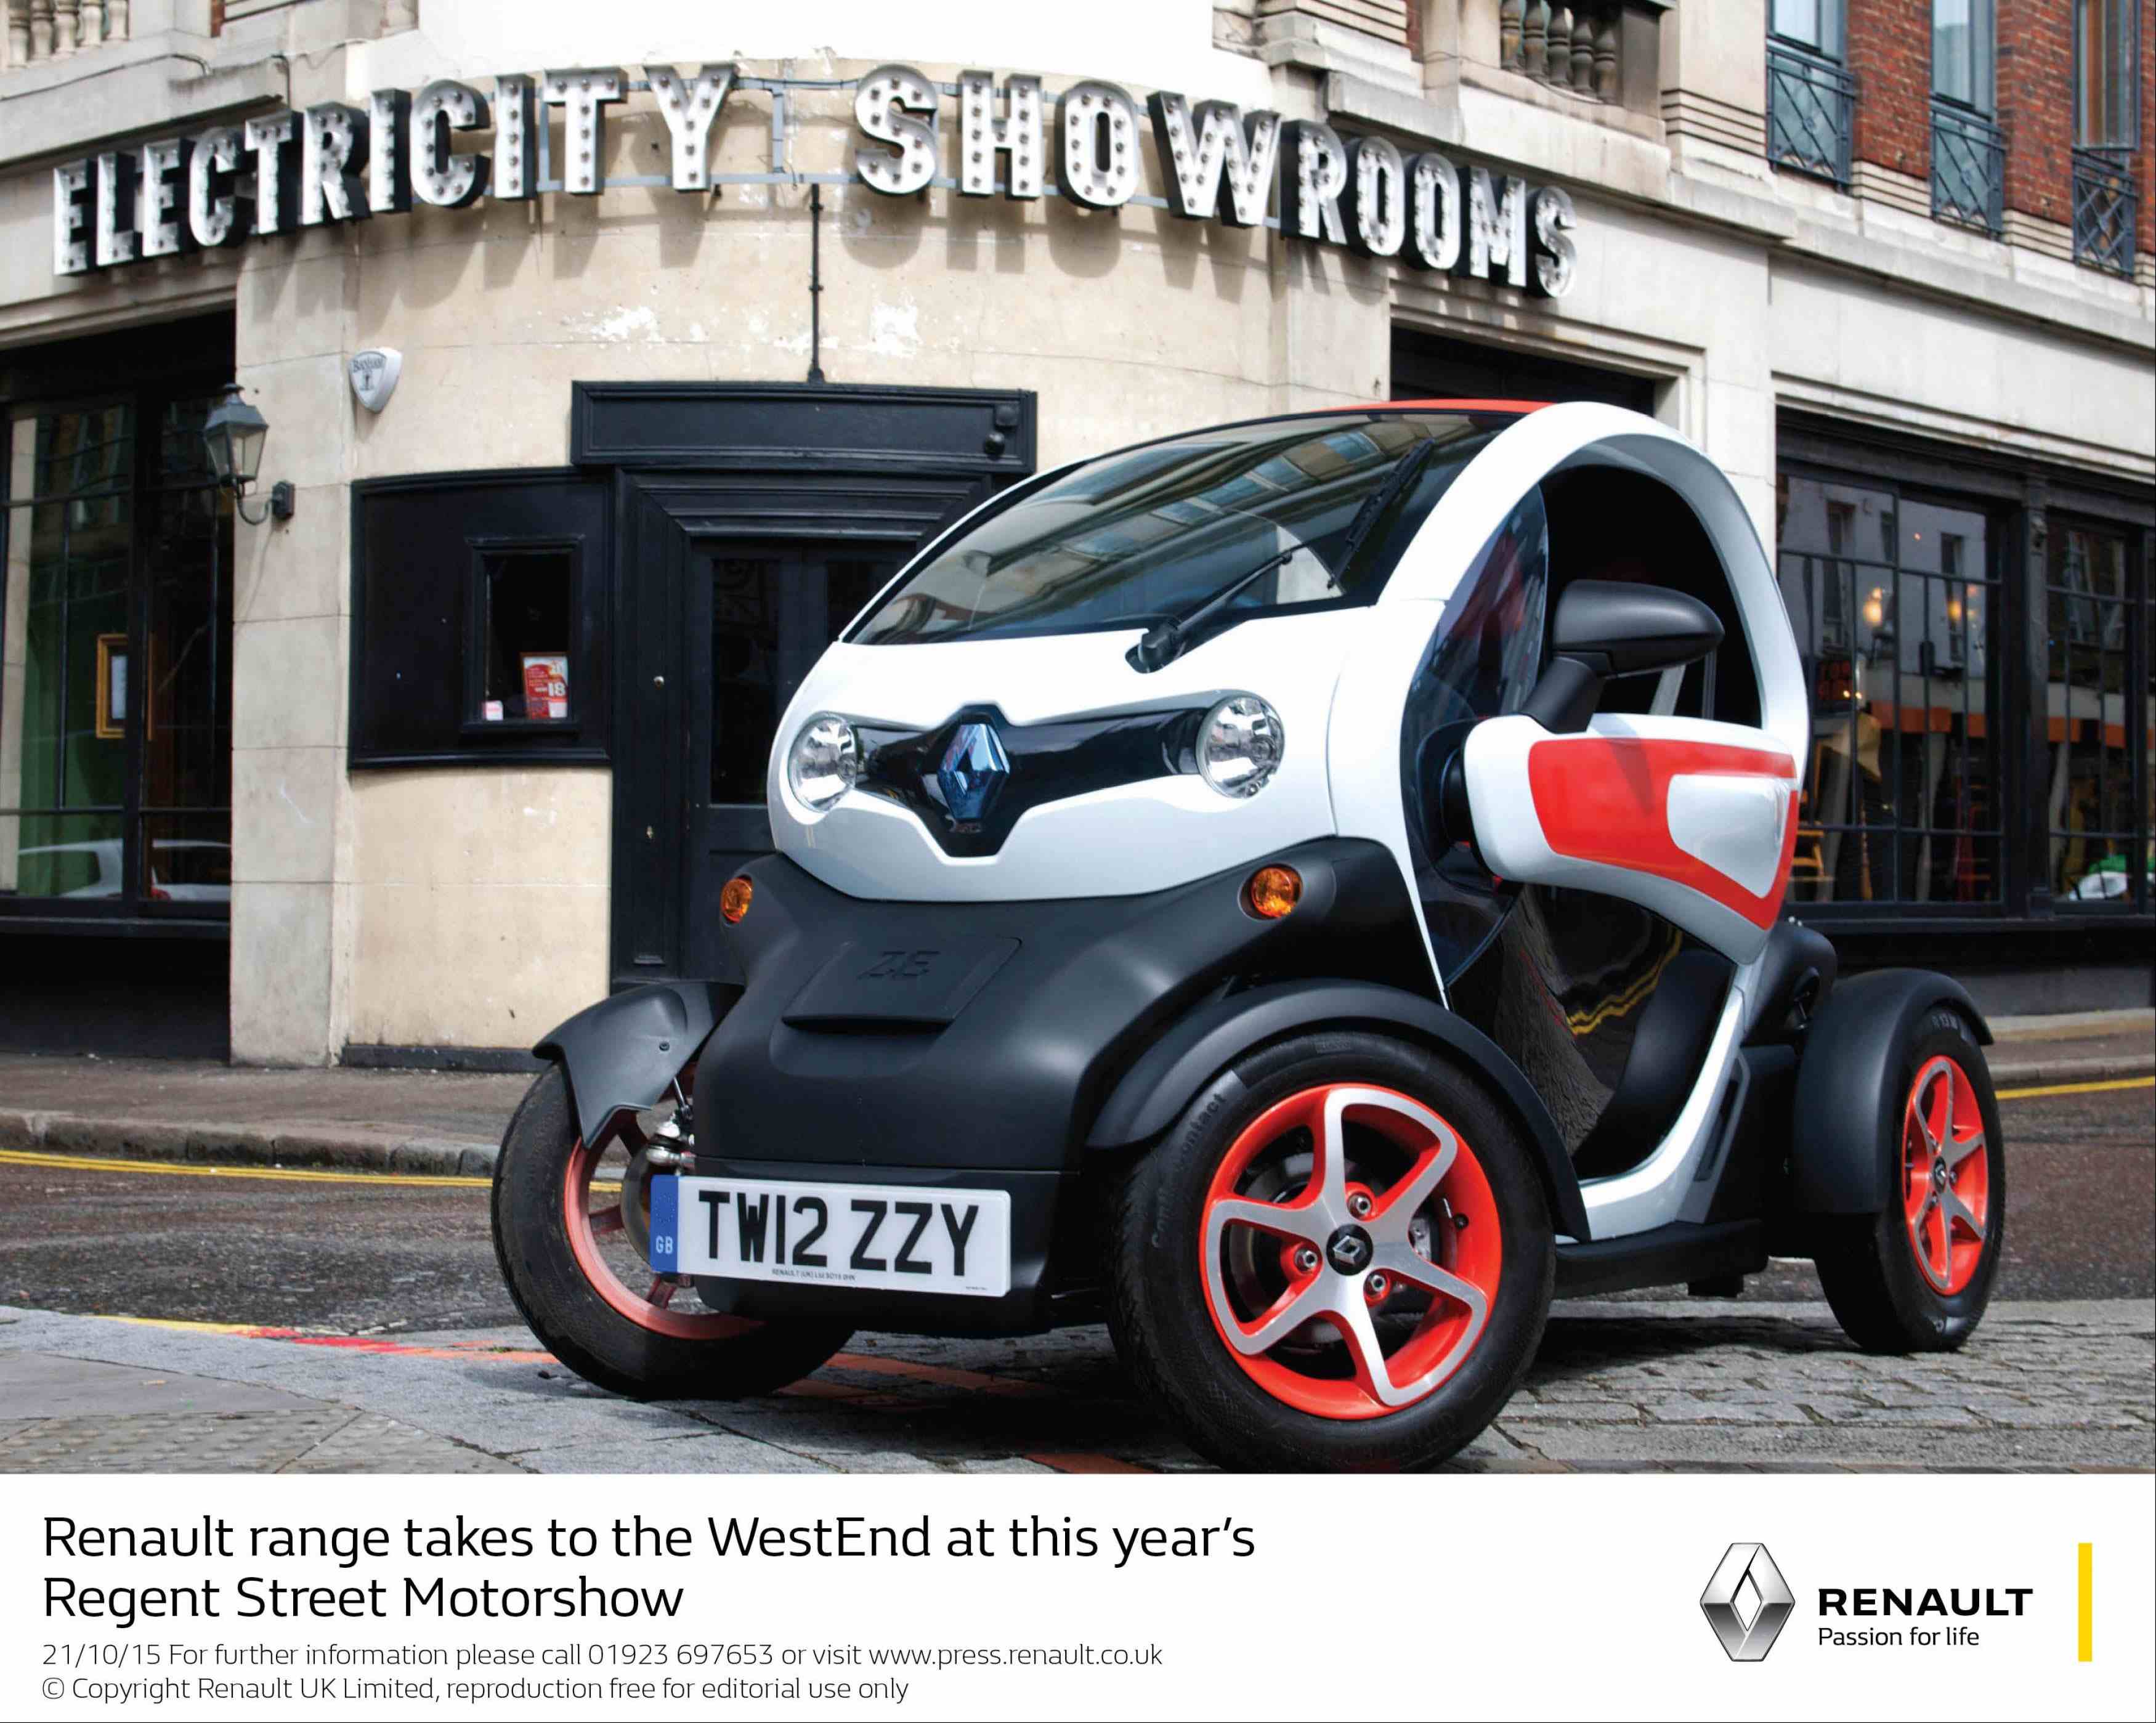 Bandiet Overzicht Legacy Used Renault Twizy Review and Buyers Guide | Electrifying